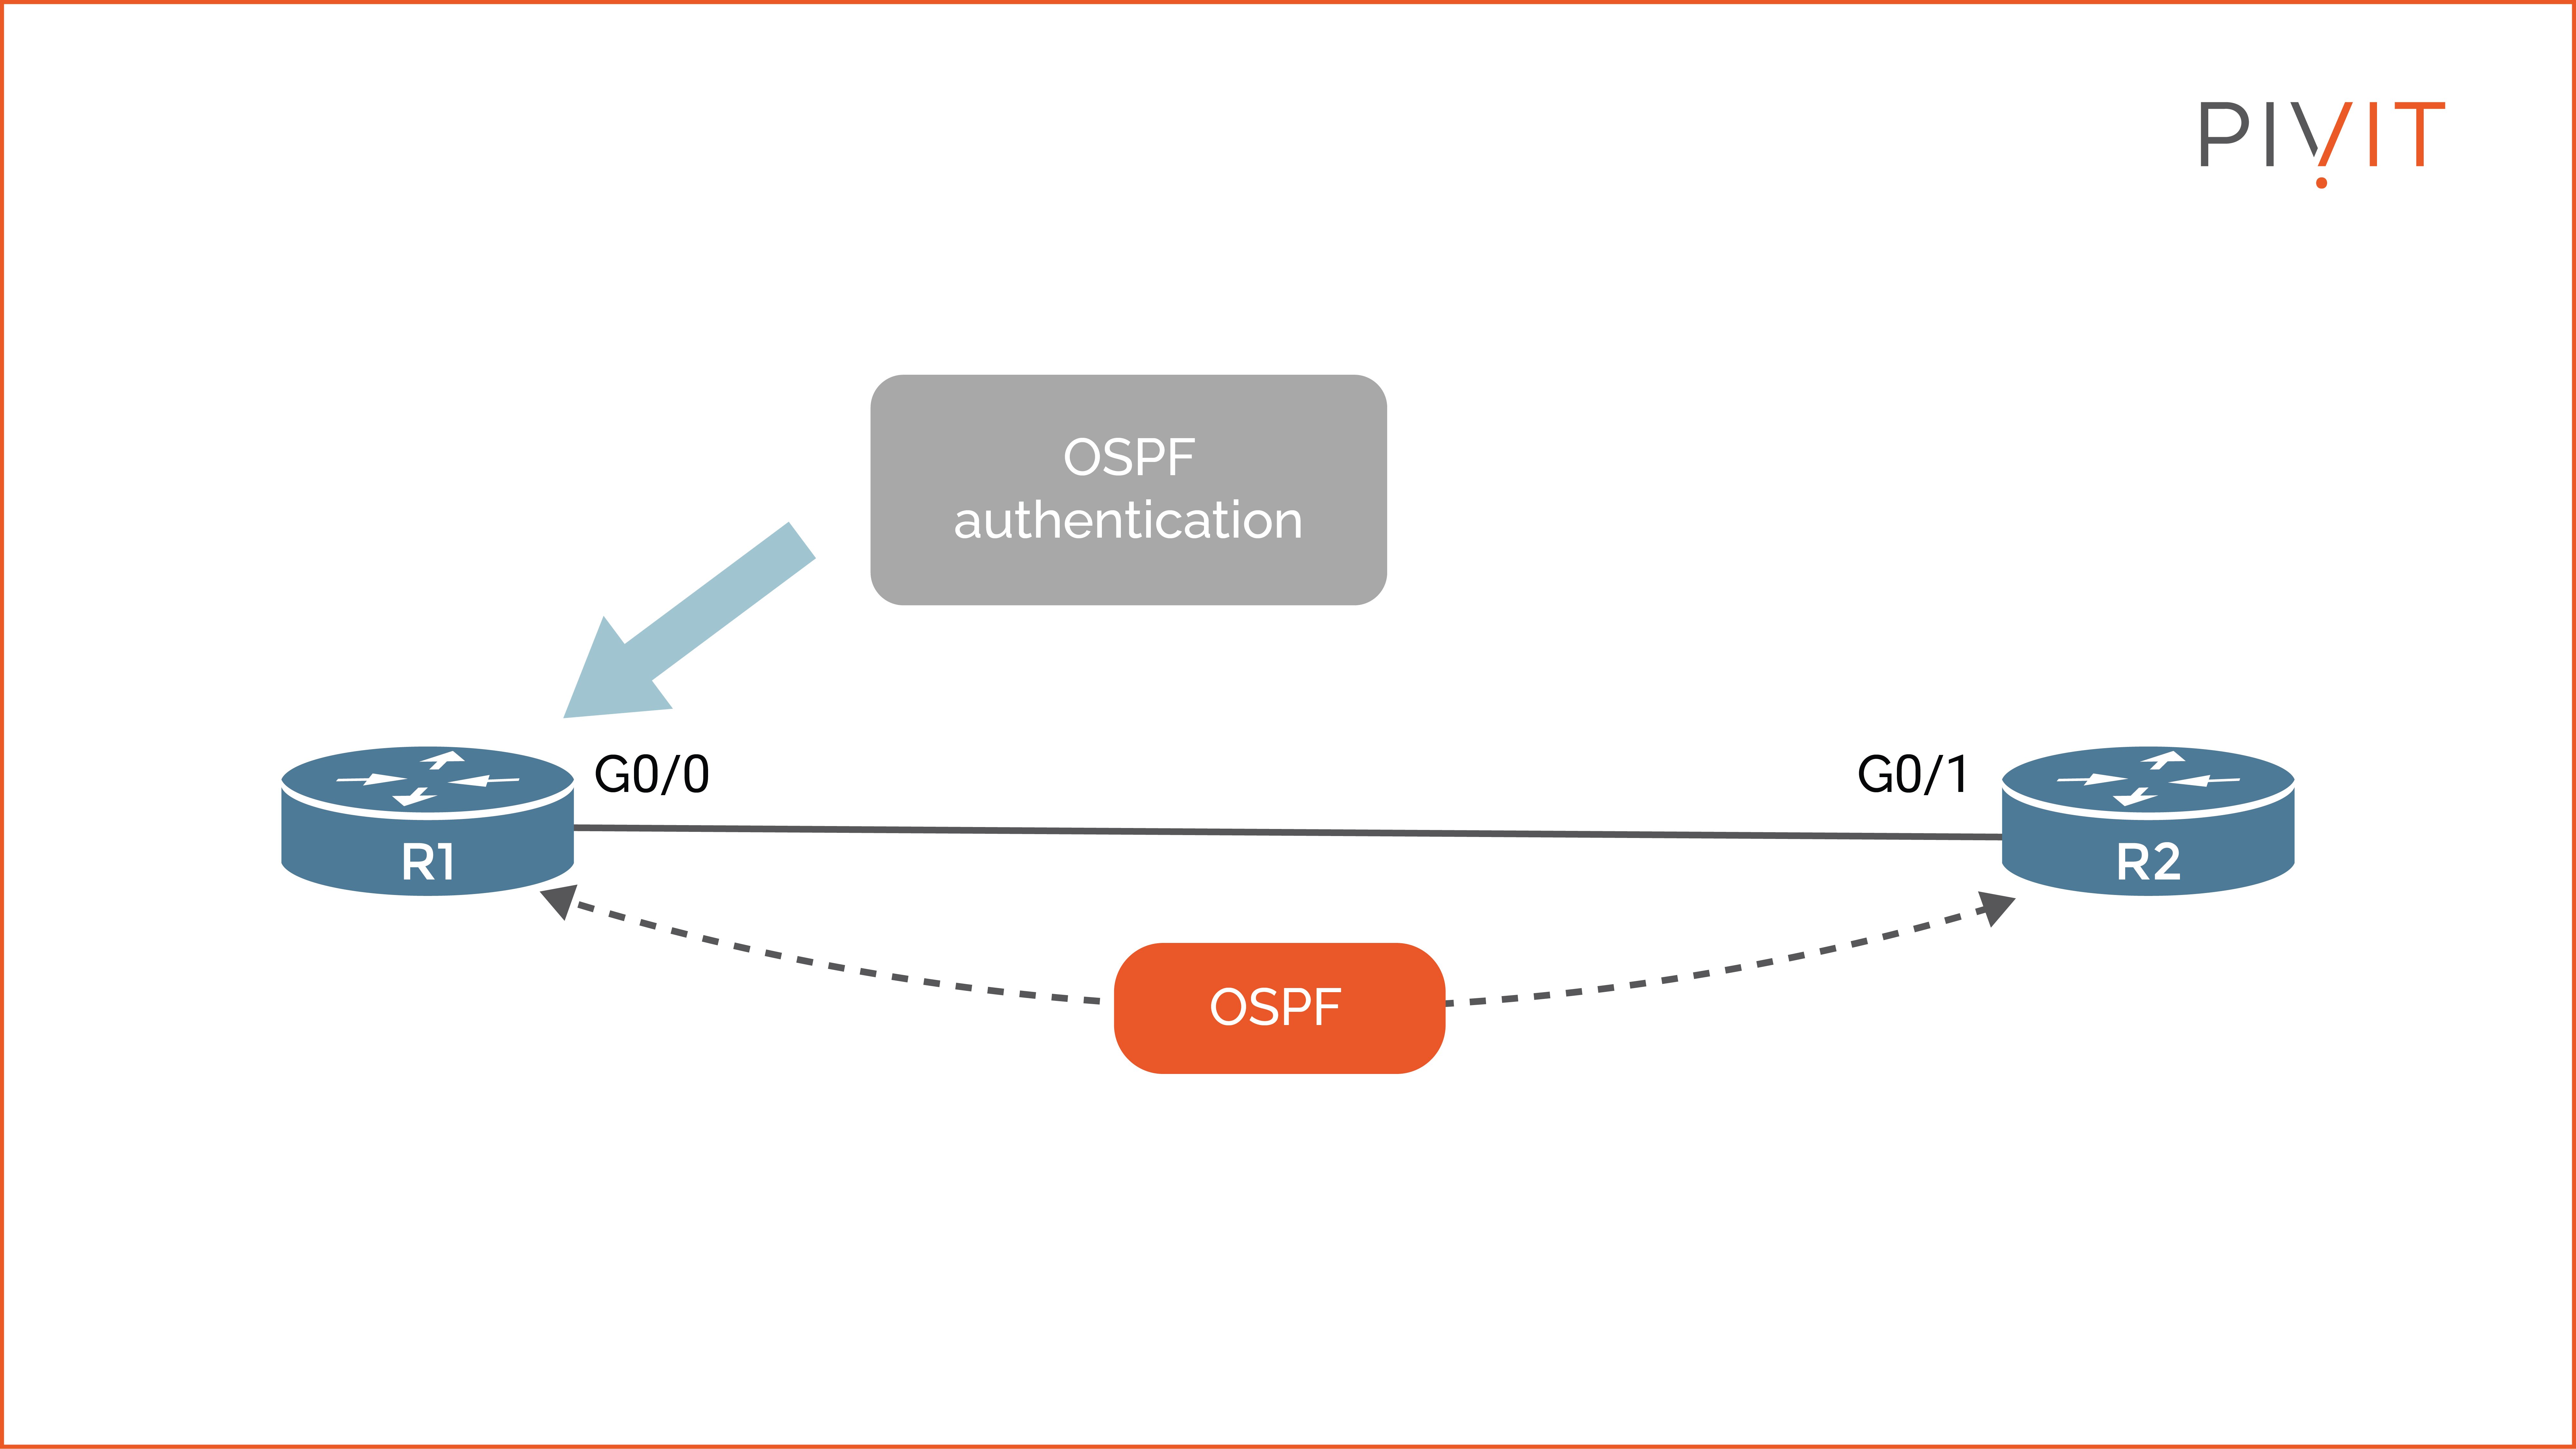 Implementing OSPF authentication on R1